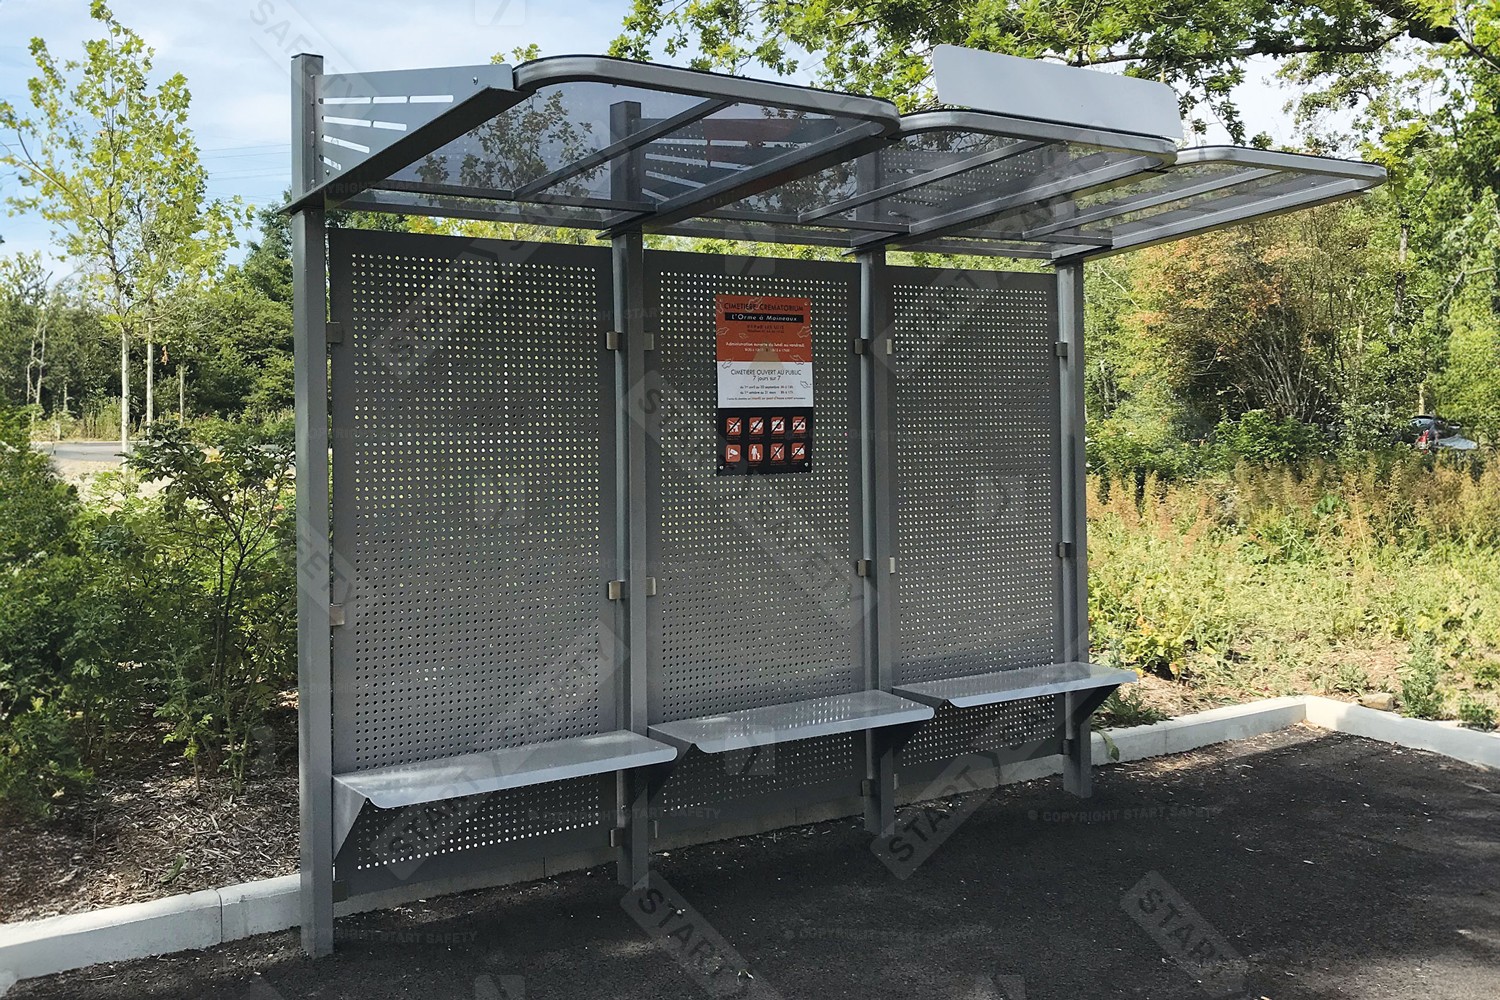 Procity Kube Bus Shelter Base model Installed In Rural Area Ready For Personalisation